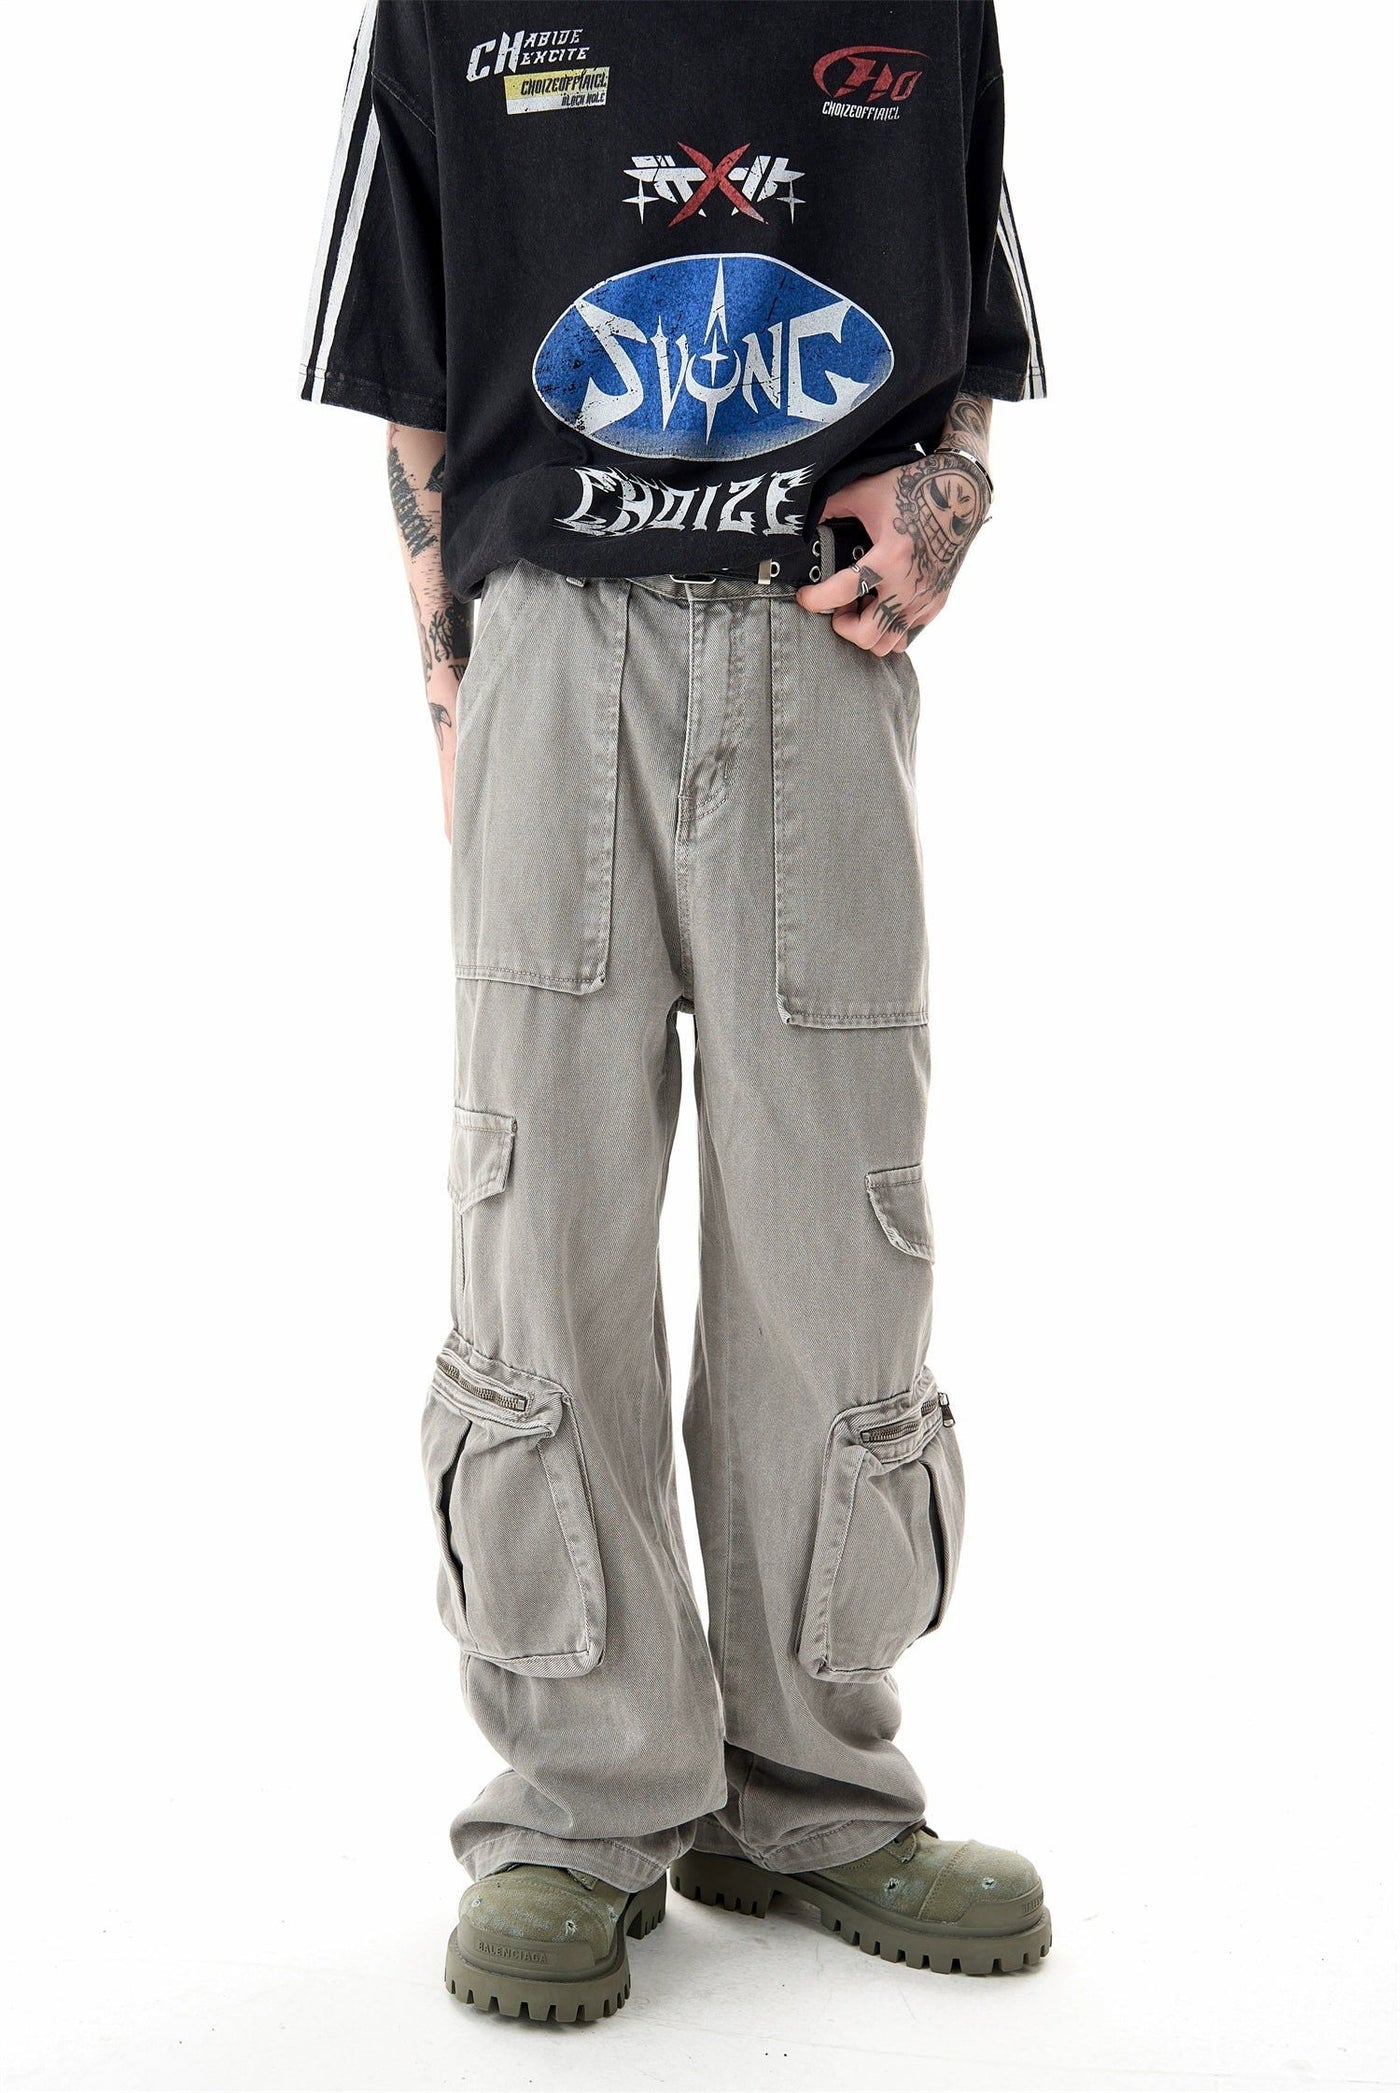 Heavy Wide Zipped Cargo Jeans Korean Street Fashion Jeans By Ash Dark Shop Online at OH Vault